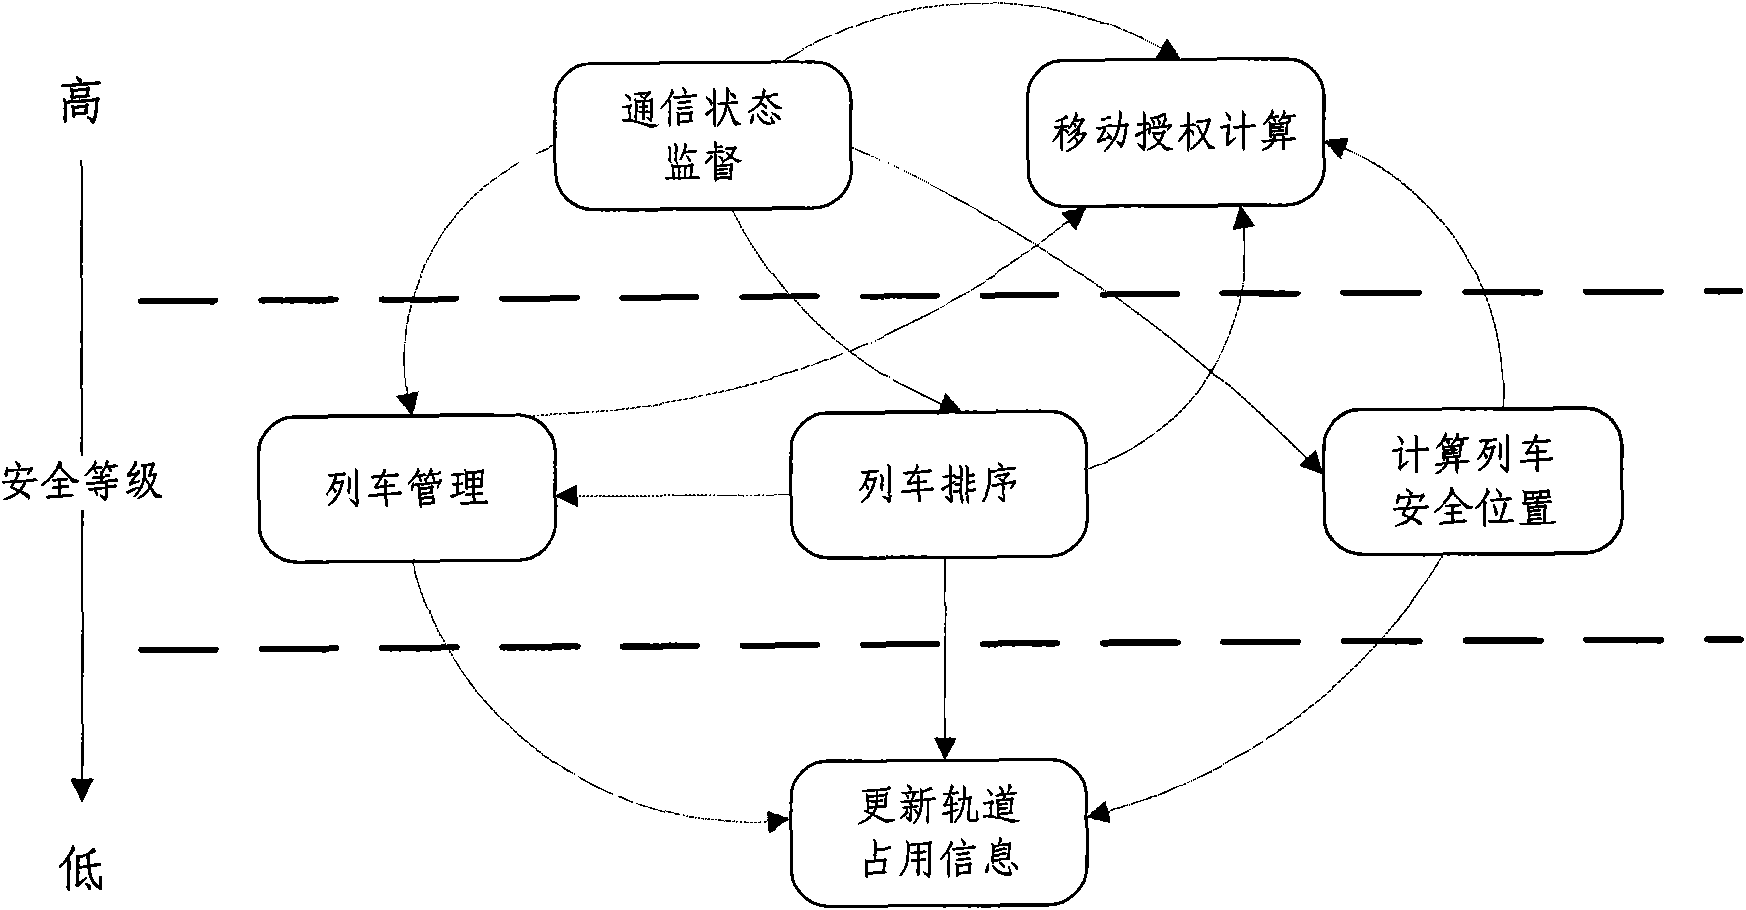 Fault-tolerant scheduling method of CBTC (Communication-Based Train Control) zone control system application software